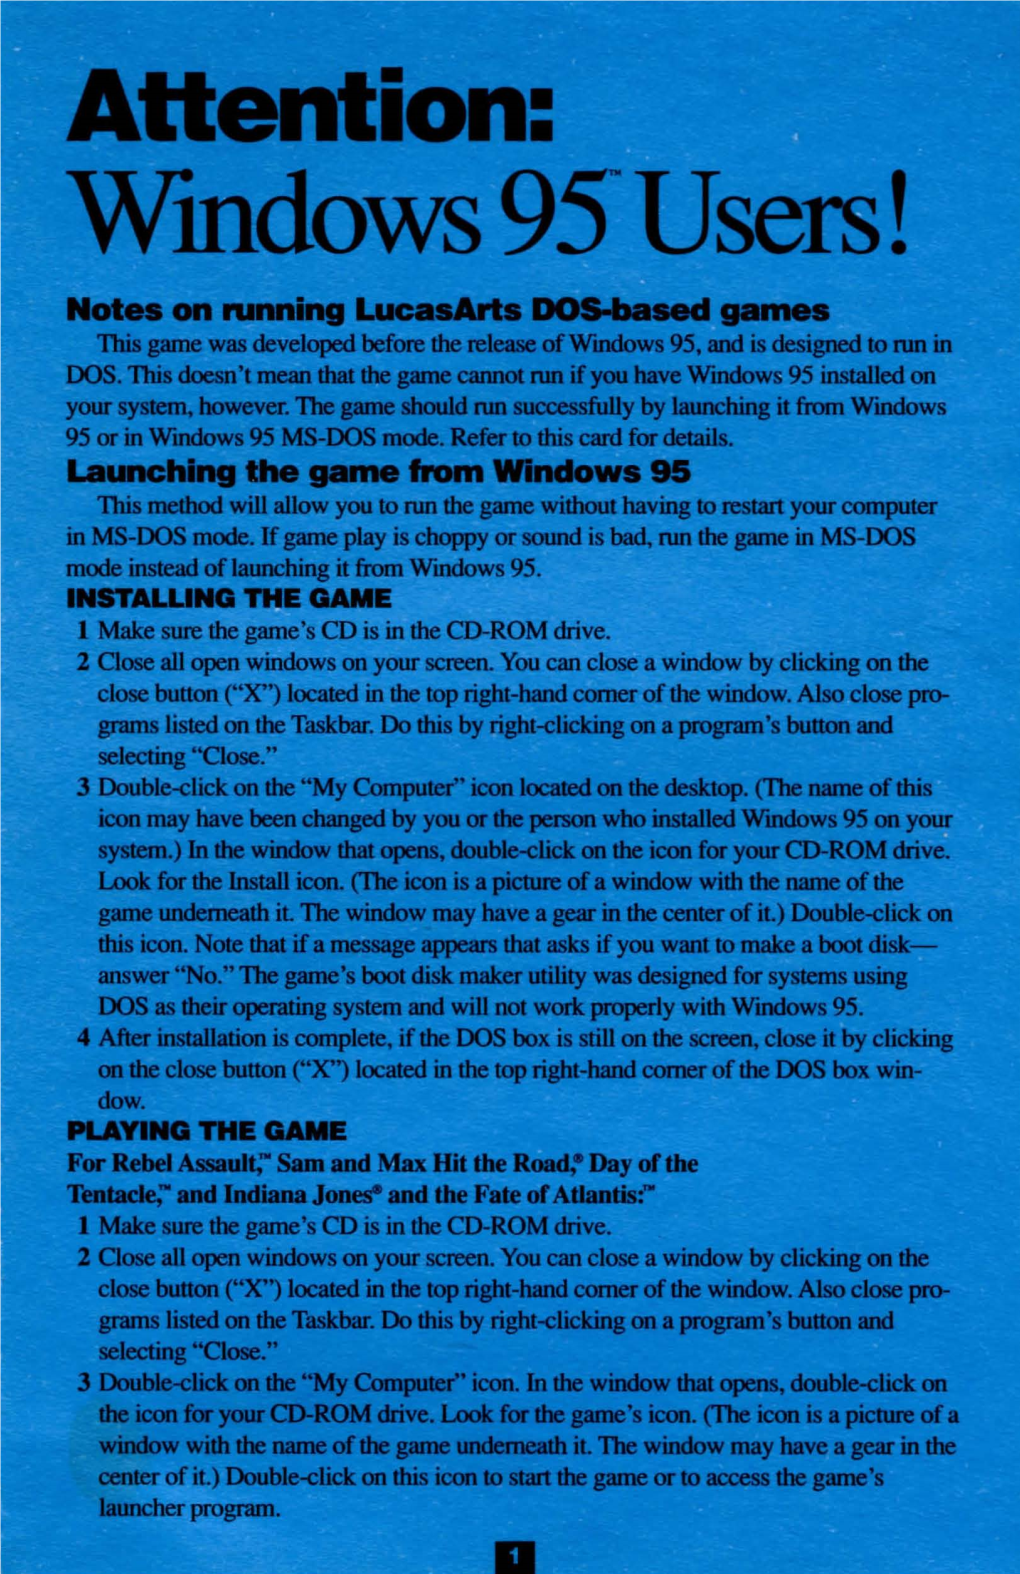 Wmdows 95" Users! Notes on Ftlnning Lucasarts Dos-Based Games This Game Was Developed Before the Release Ofwmdows 95, and Is Designed to Run in OOS